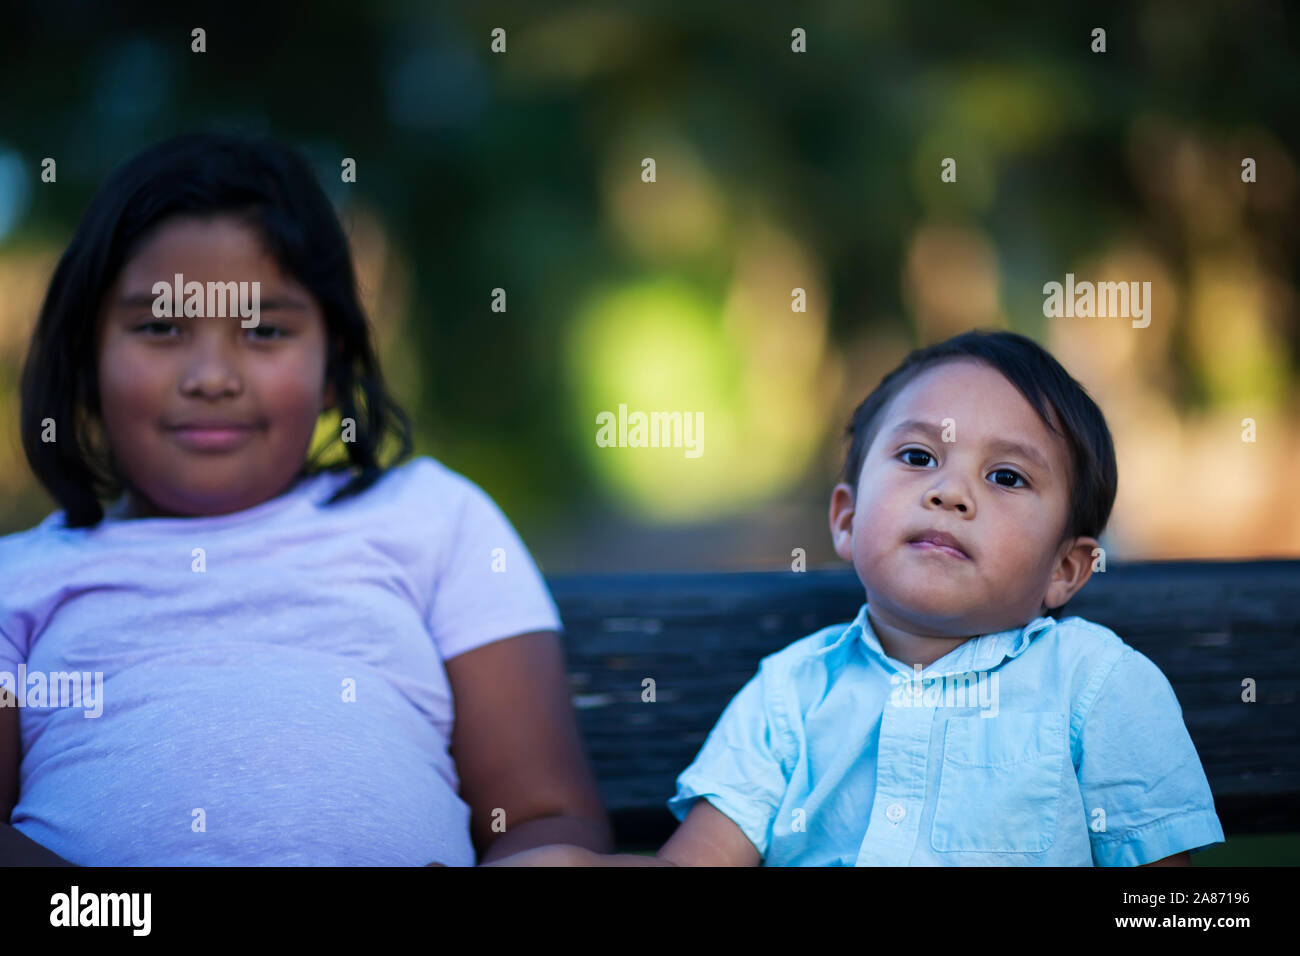 A little brother sitting next to her big sister but showing indifference towards her. Stock Photo